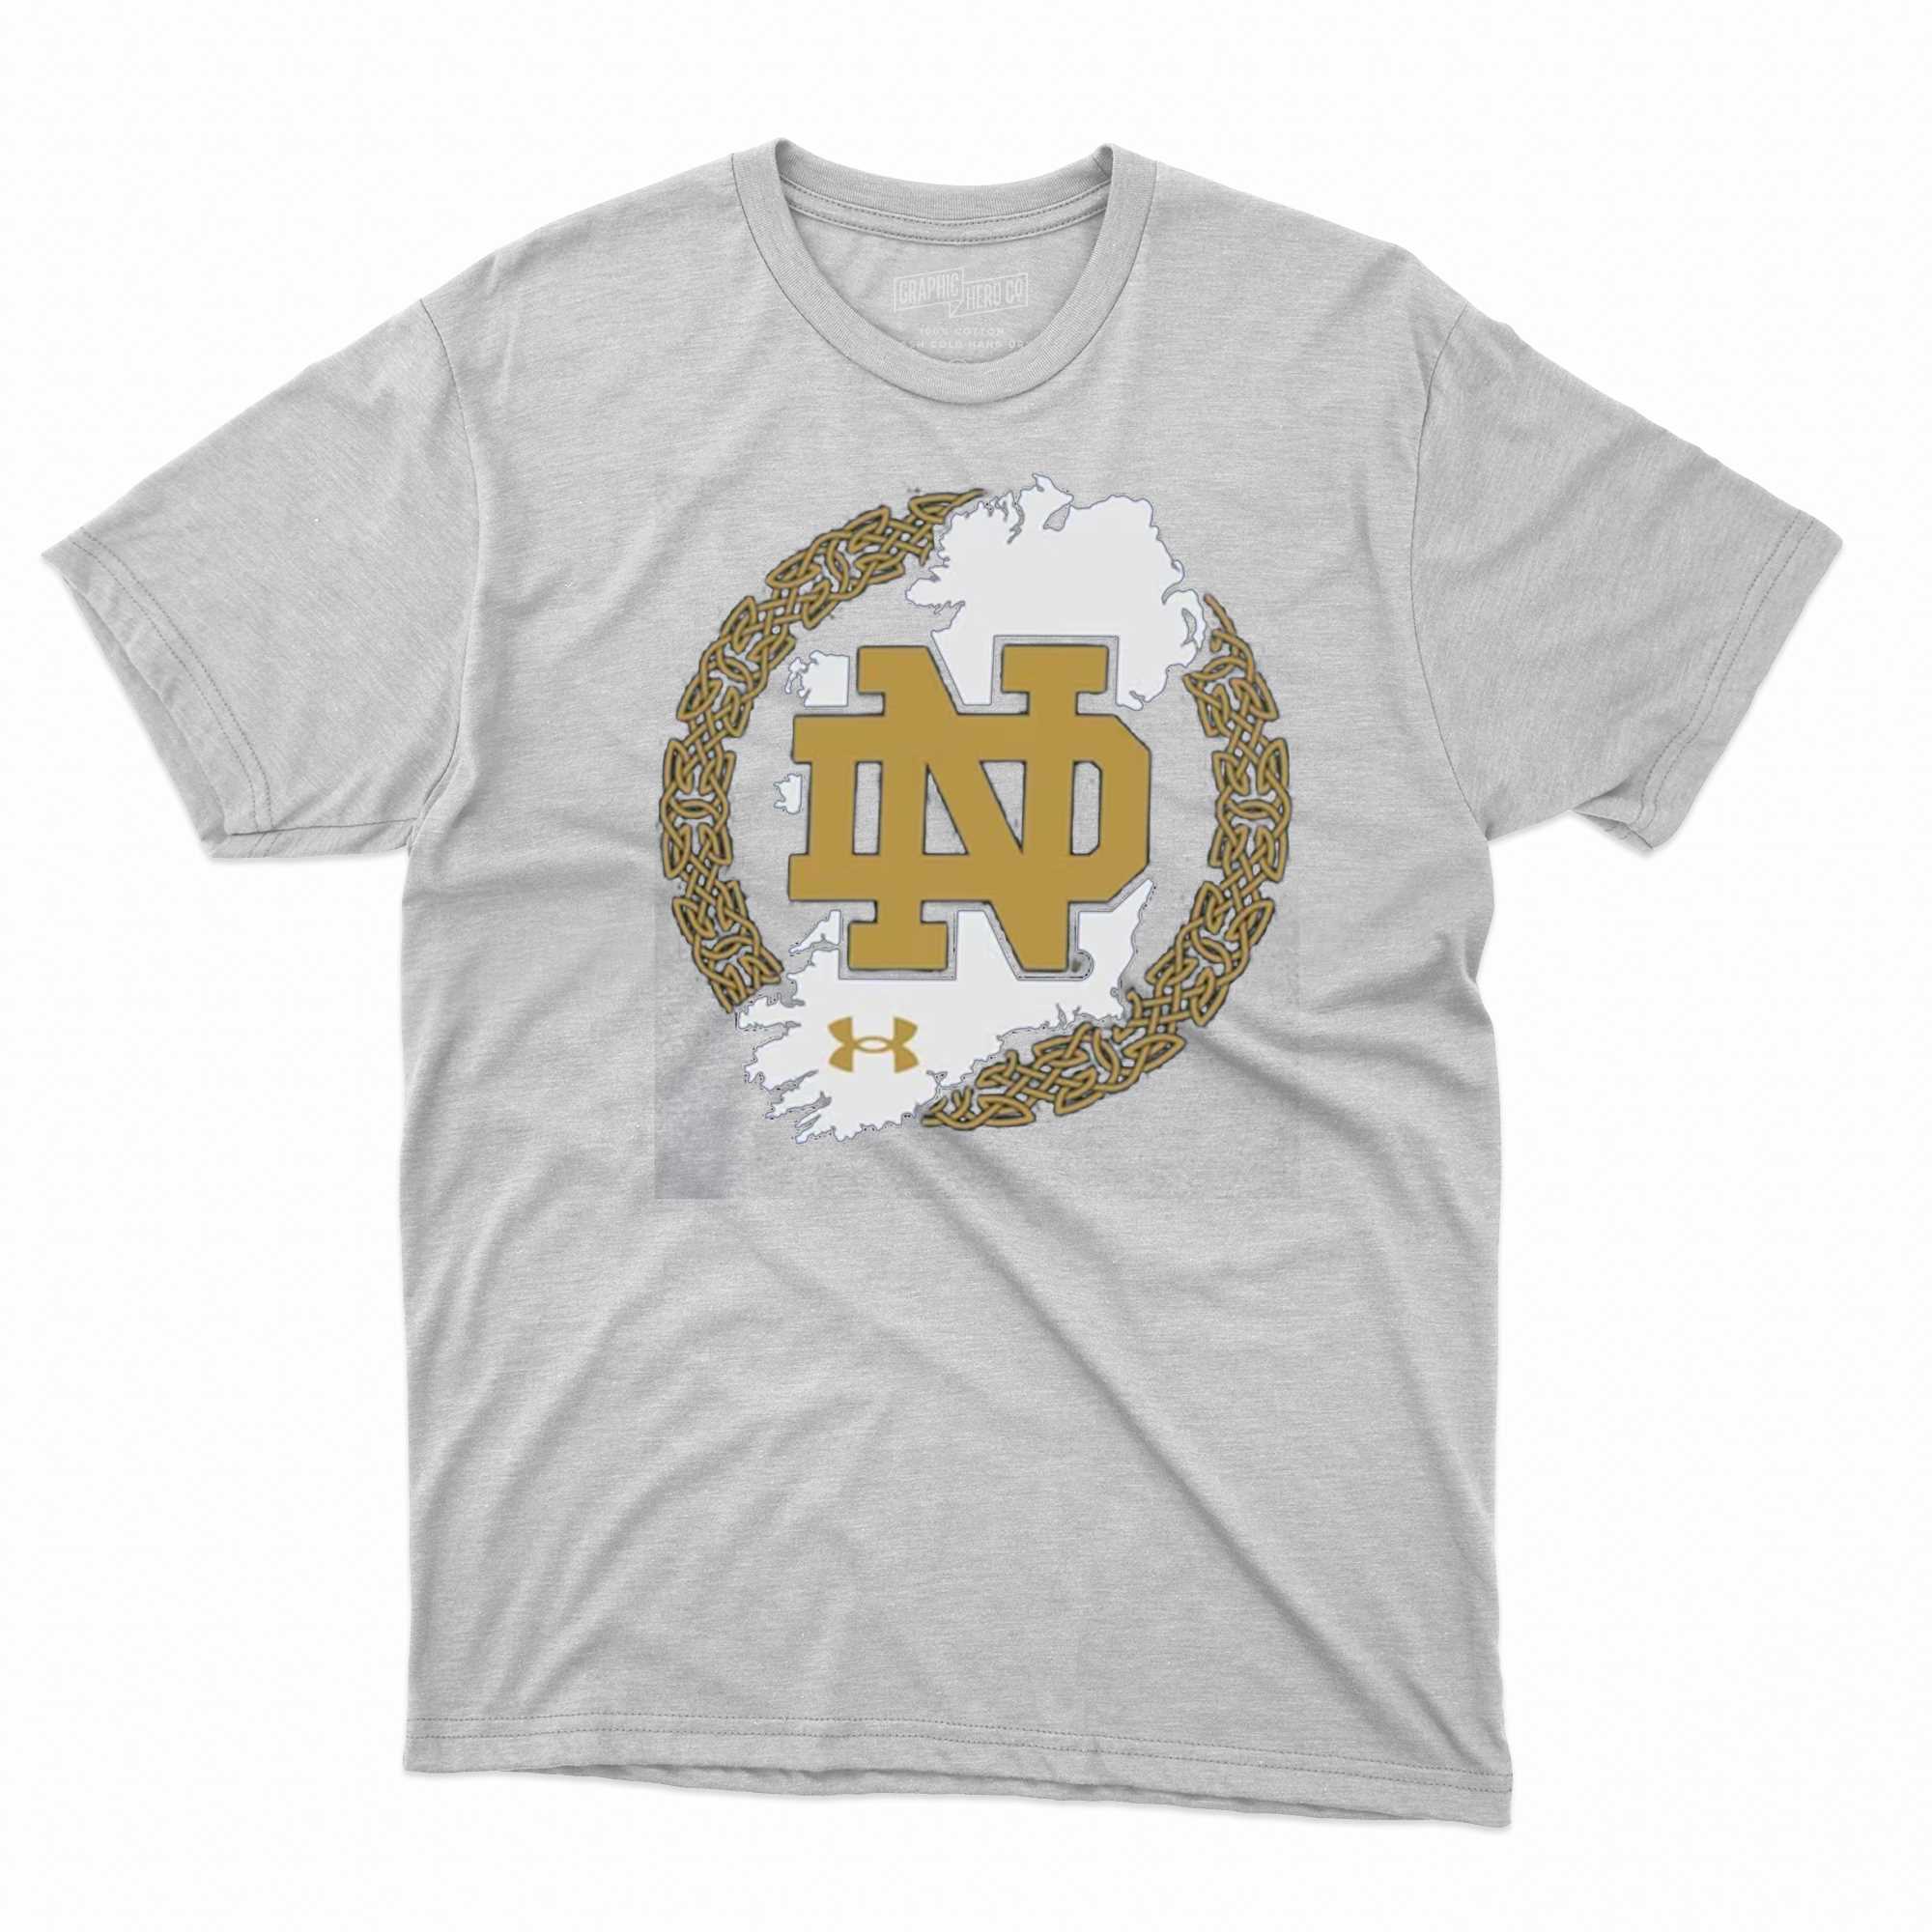 Men's Under Armour White Notre Dame Fighting Irish 2023 Aer Lingus College  Football Classic Map Performance Cotton T-Shirt